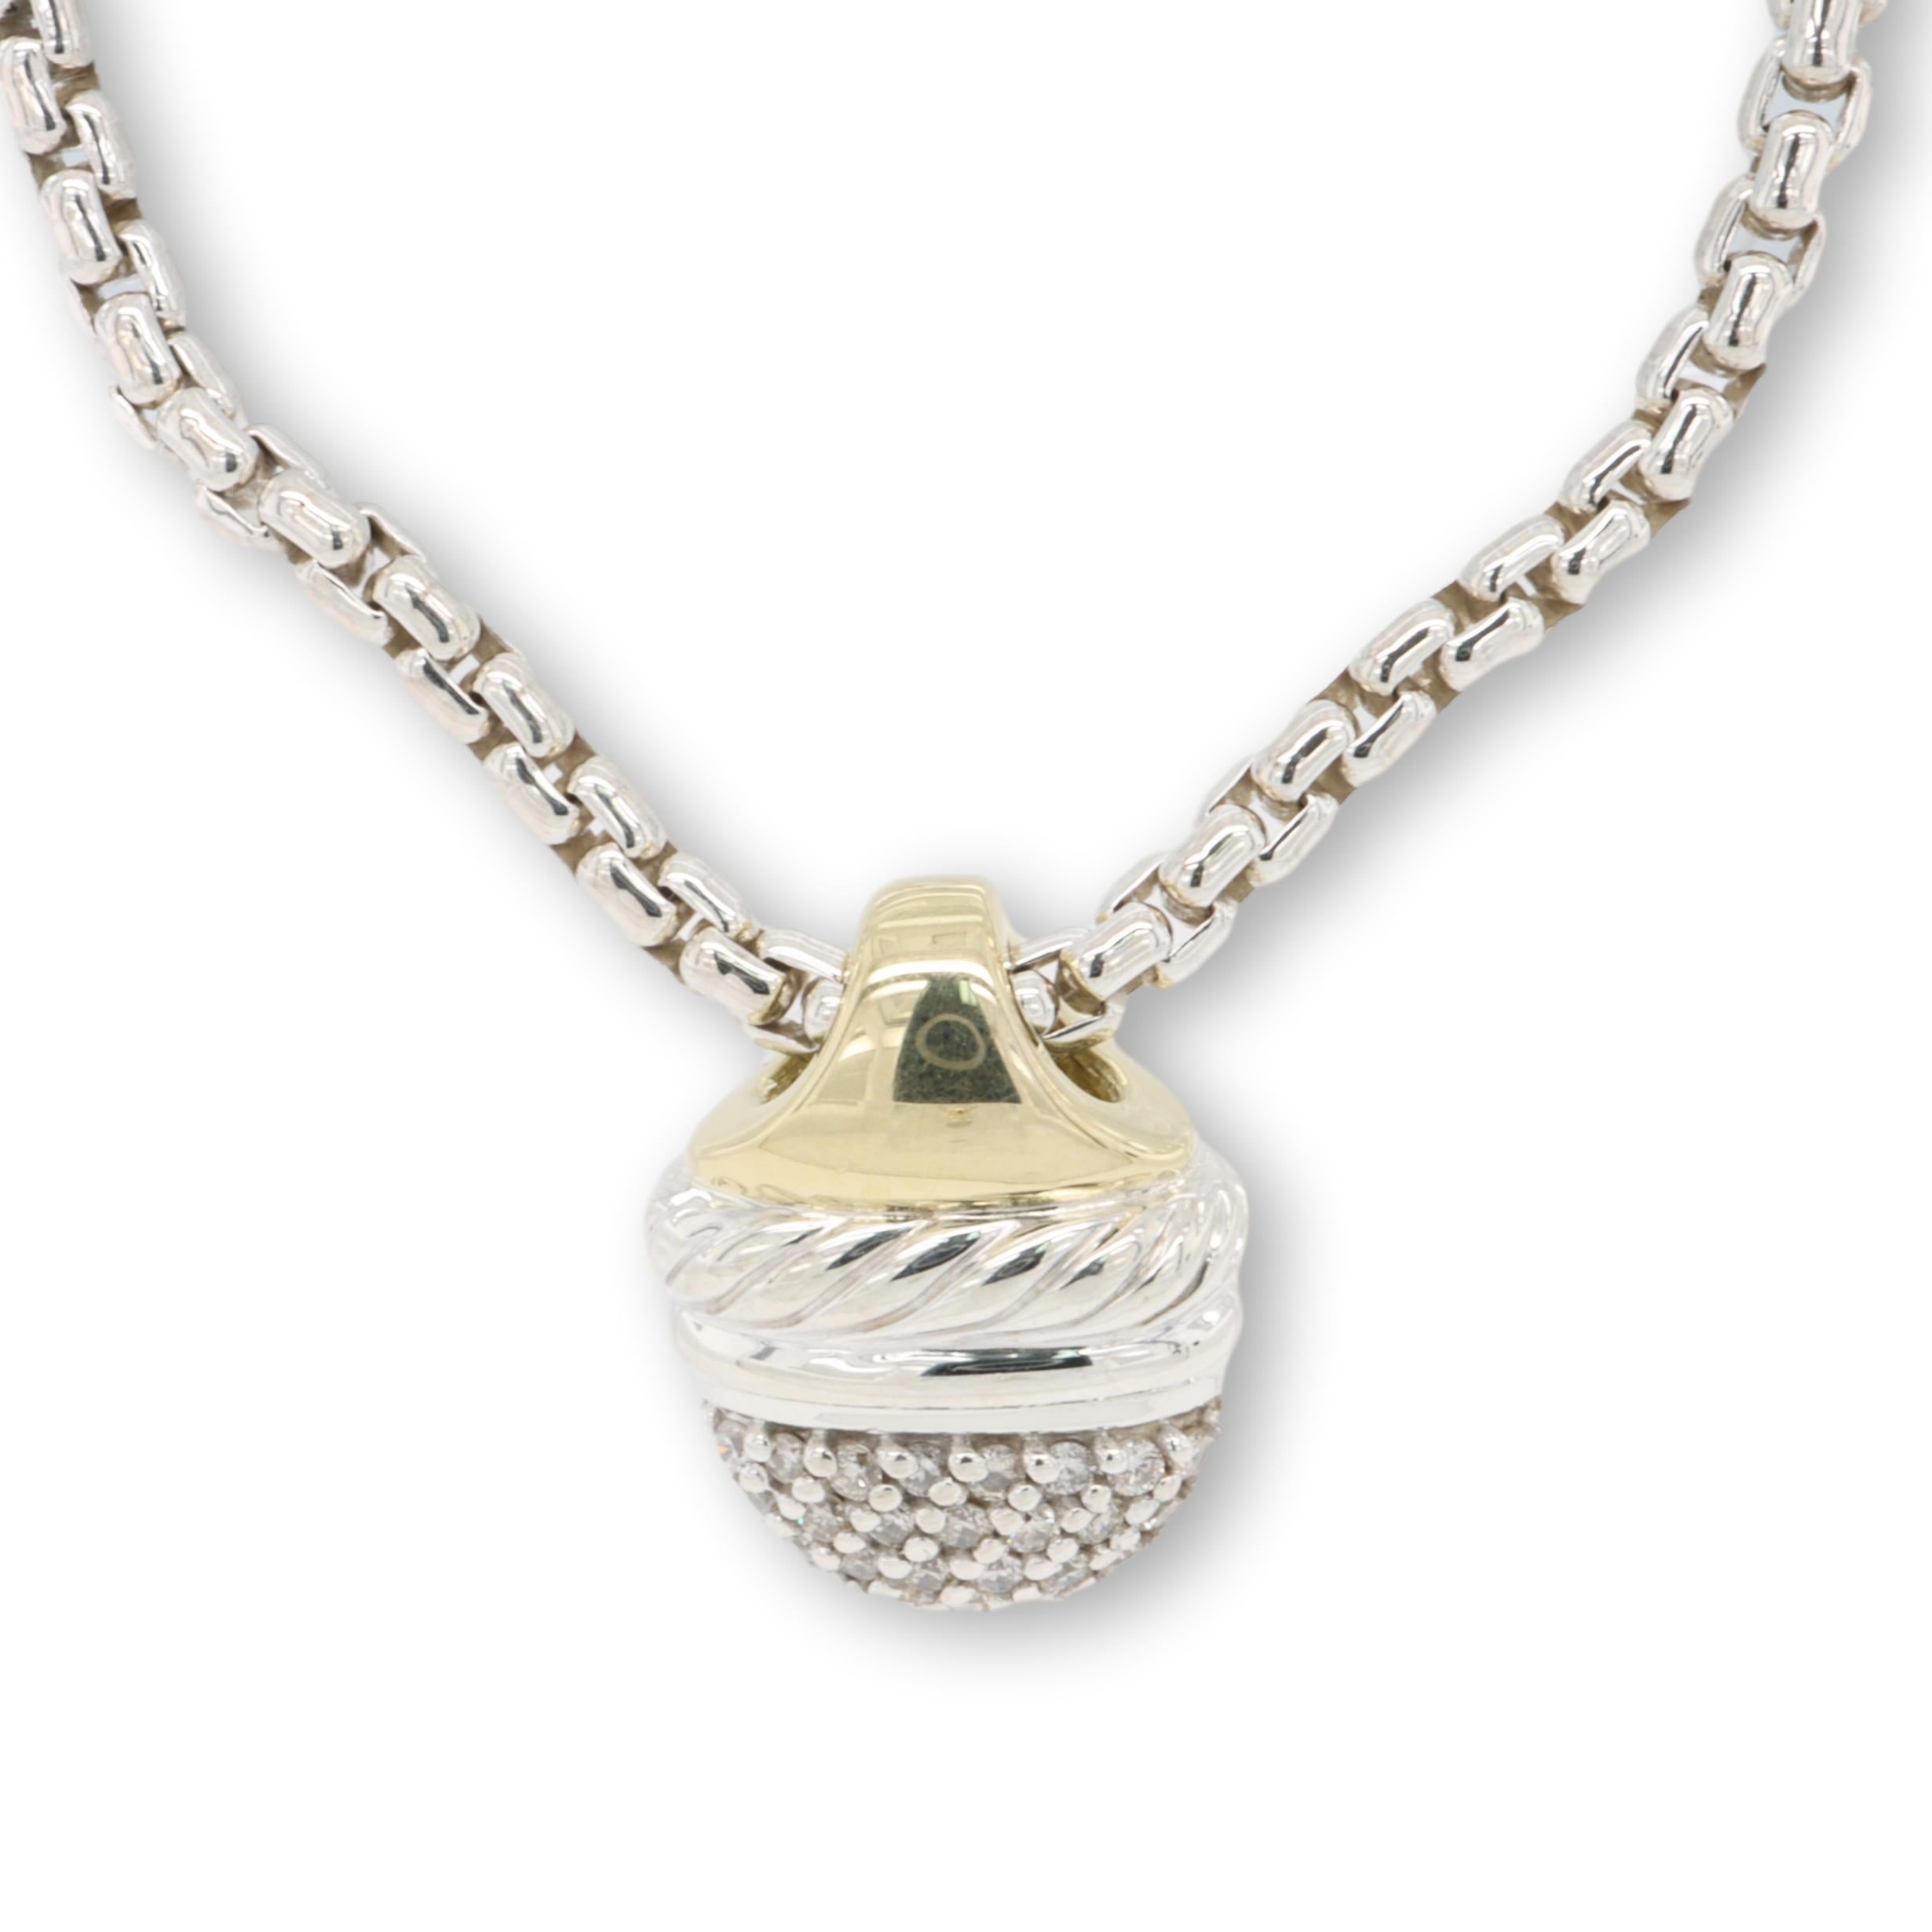 David Yurman necklace finely crafted in sterling silver featuring a slide acorn pendant design adorned with round brilliant cut pave set diamonds and a mix of 18 karat yellow gold and silver detail hanging off an 16